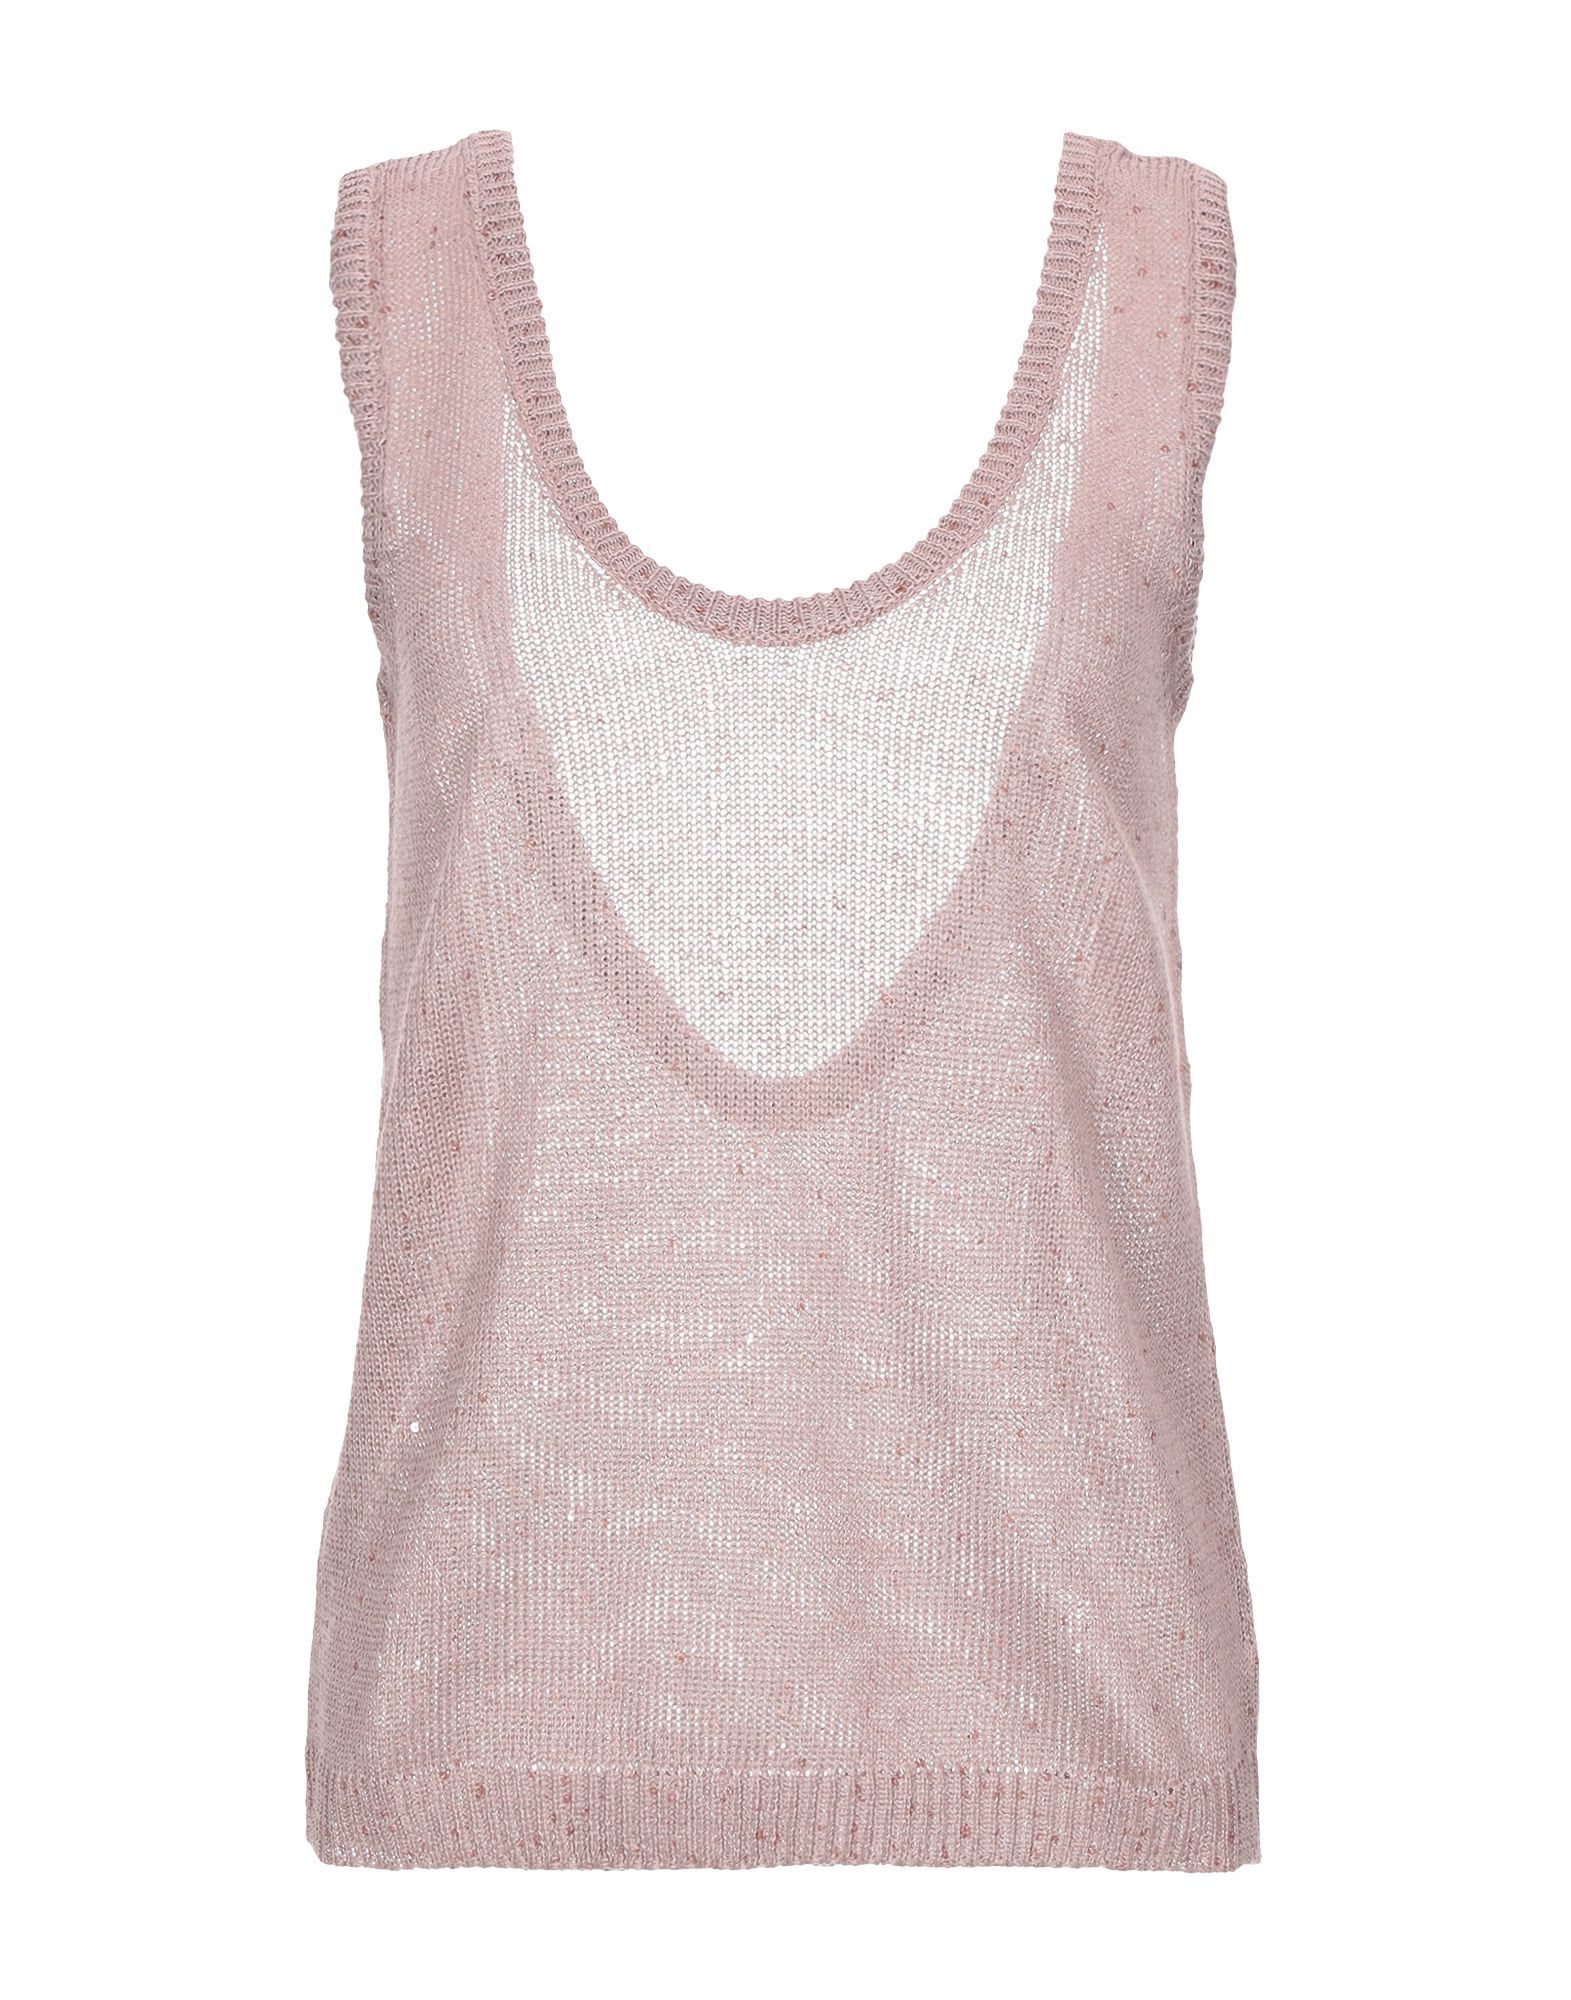 knitted, sequins, solid colour, deep neckline, sleeveless, no pockets